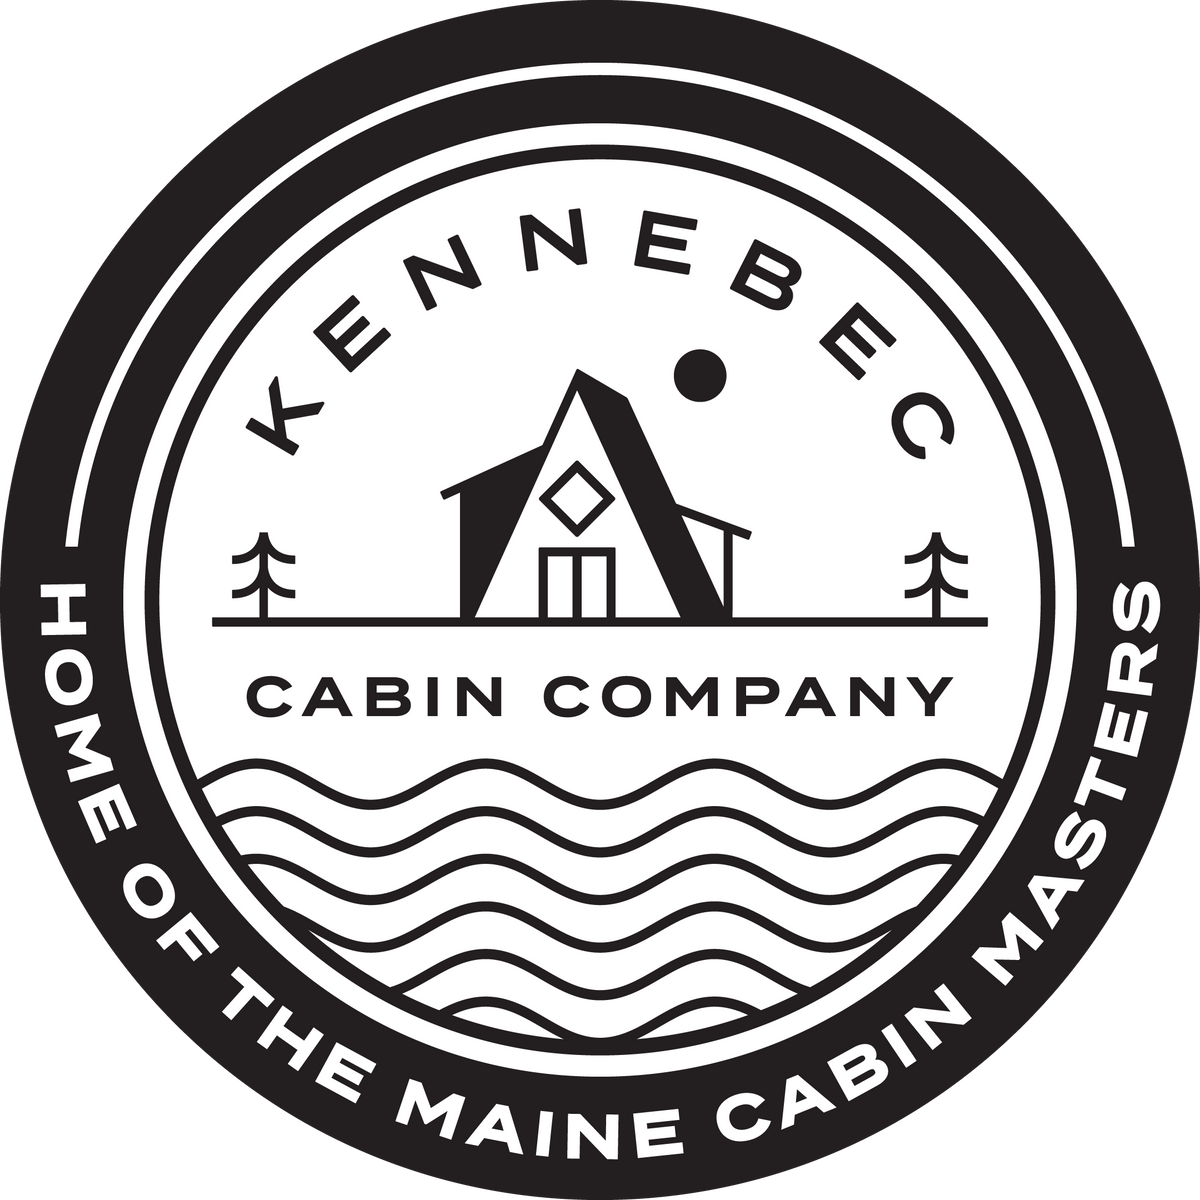 Kennebec Cabin Company online store inspired by Maine Cabin Masters